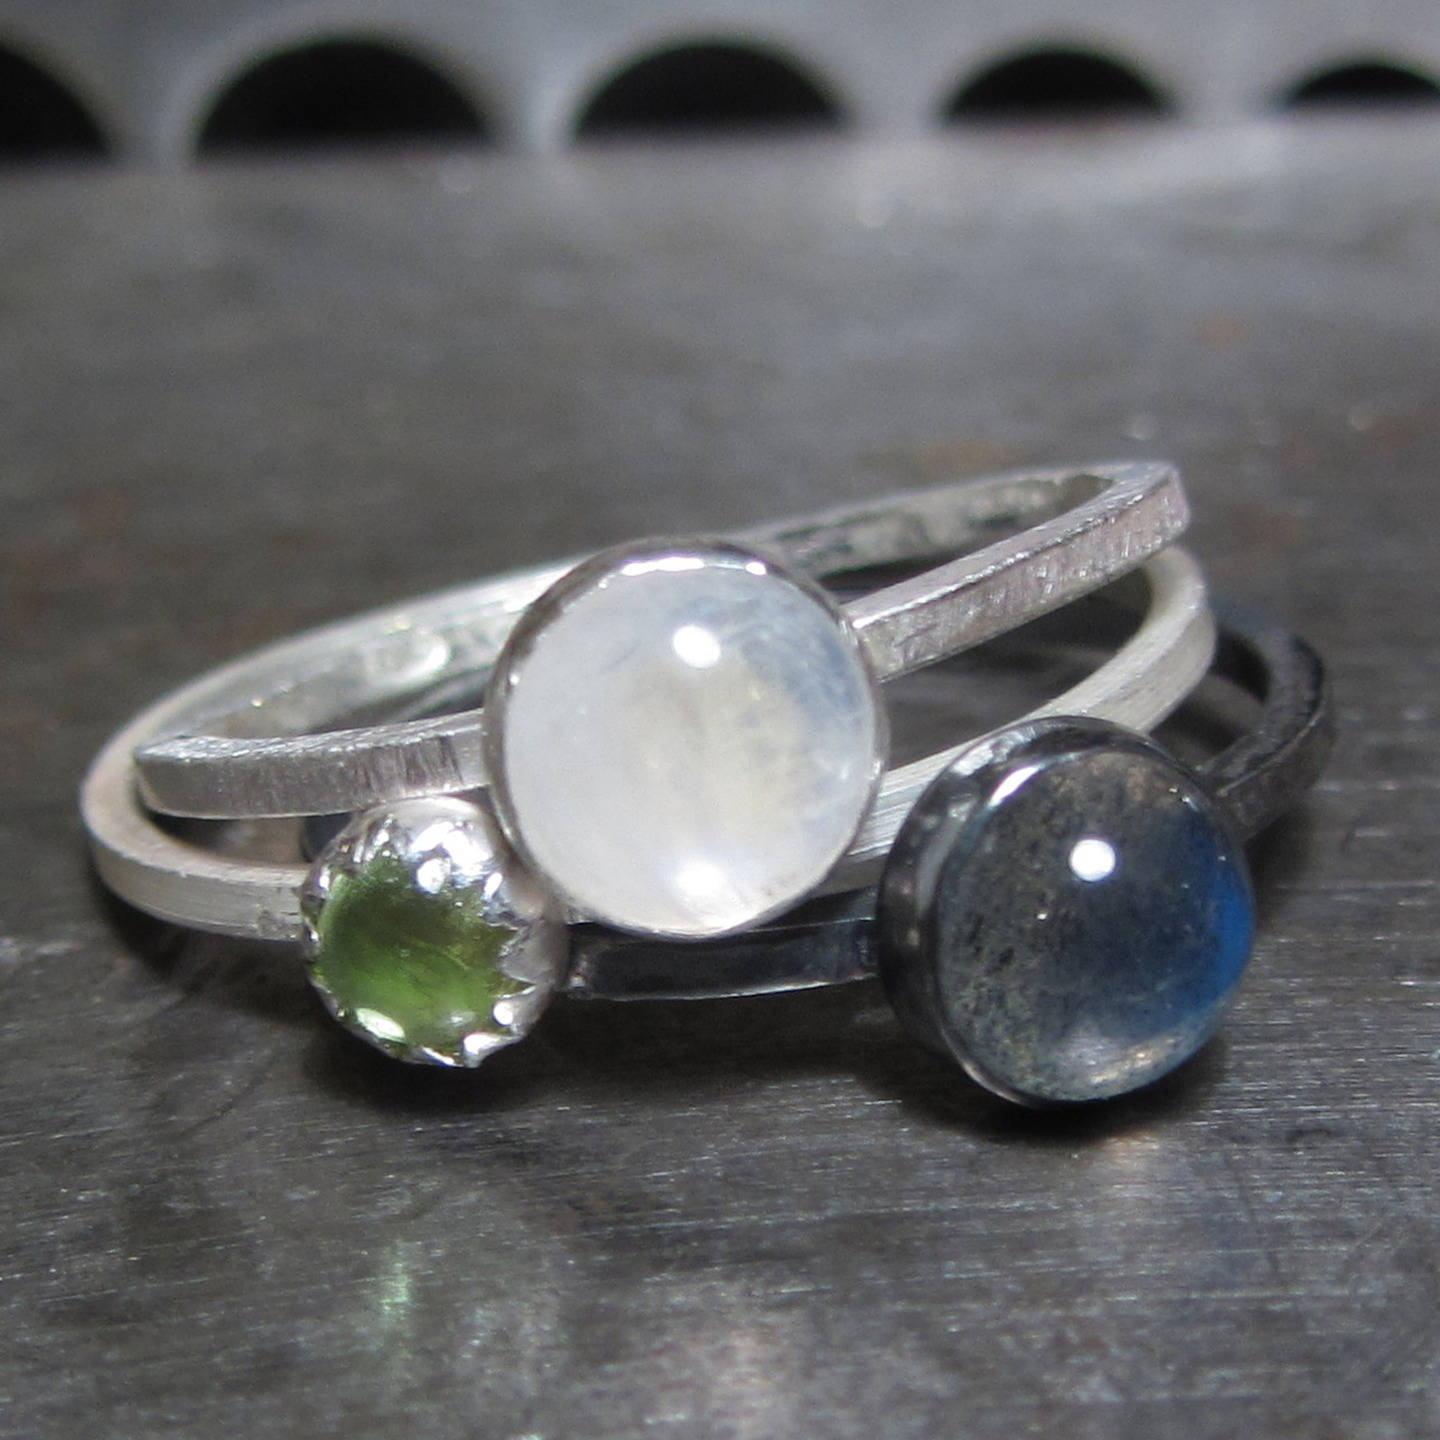 White Moonstone, grey labradorite and green peridot stacking rings in sterling silver 925, moonstone ring stack, gemstones rings